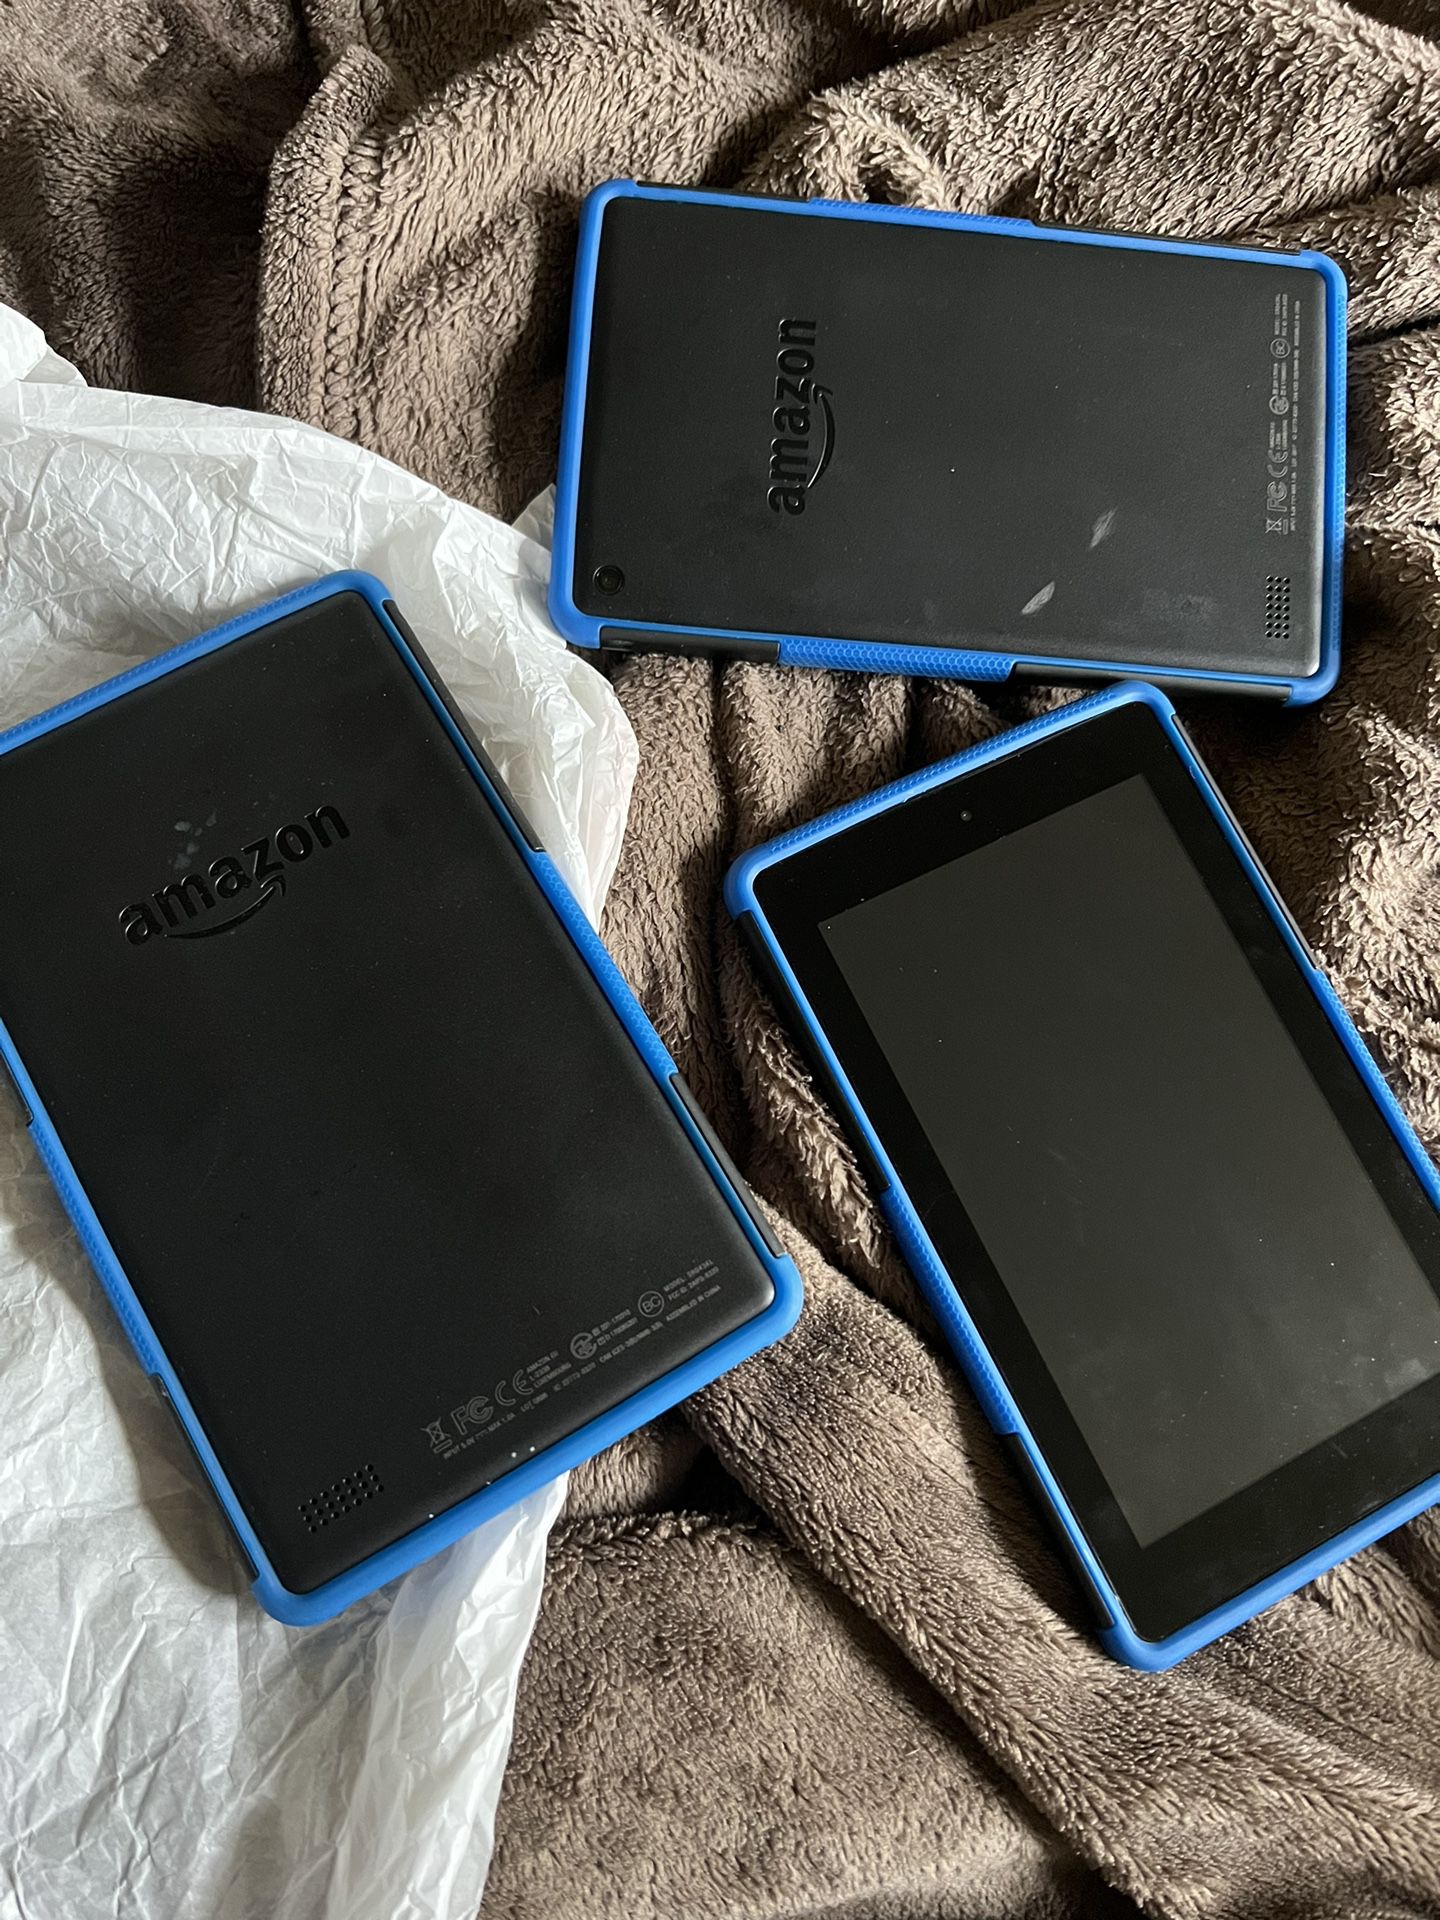 Amazon Fires Tablets. 